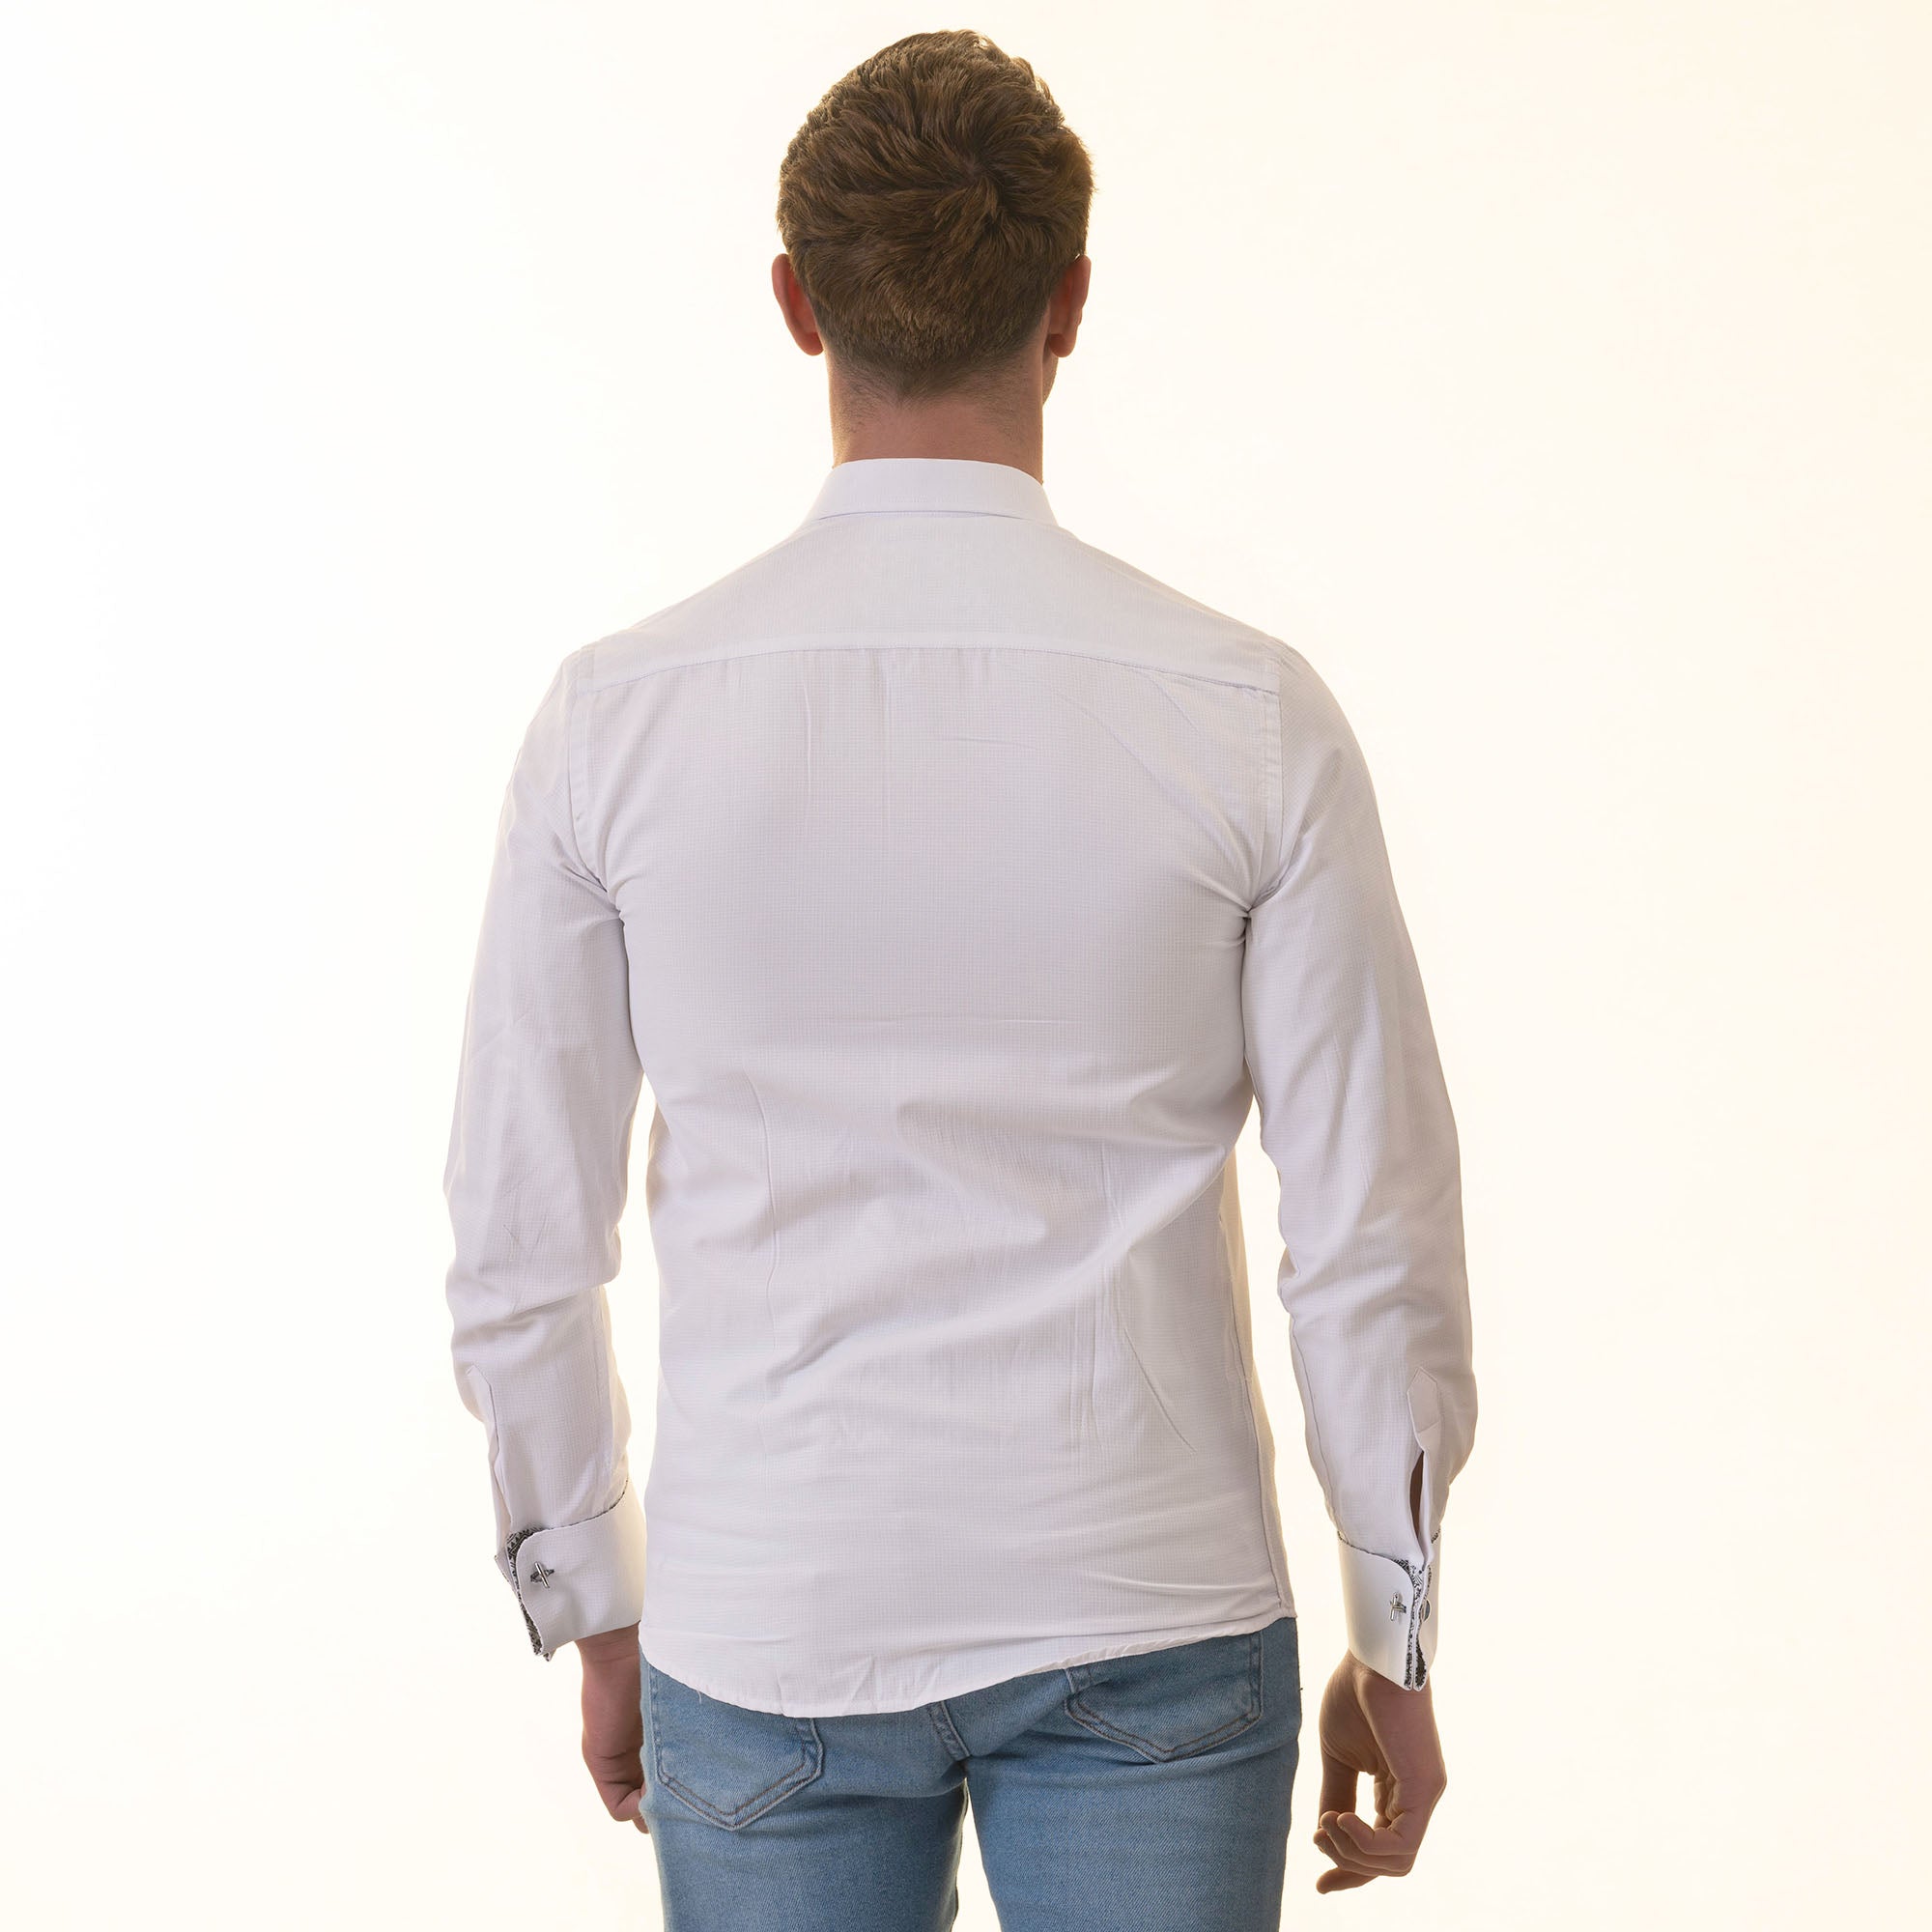 Long Sleeved Fitted Shirt - Luxury White